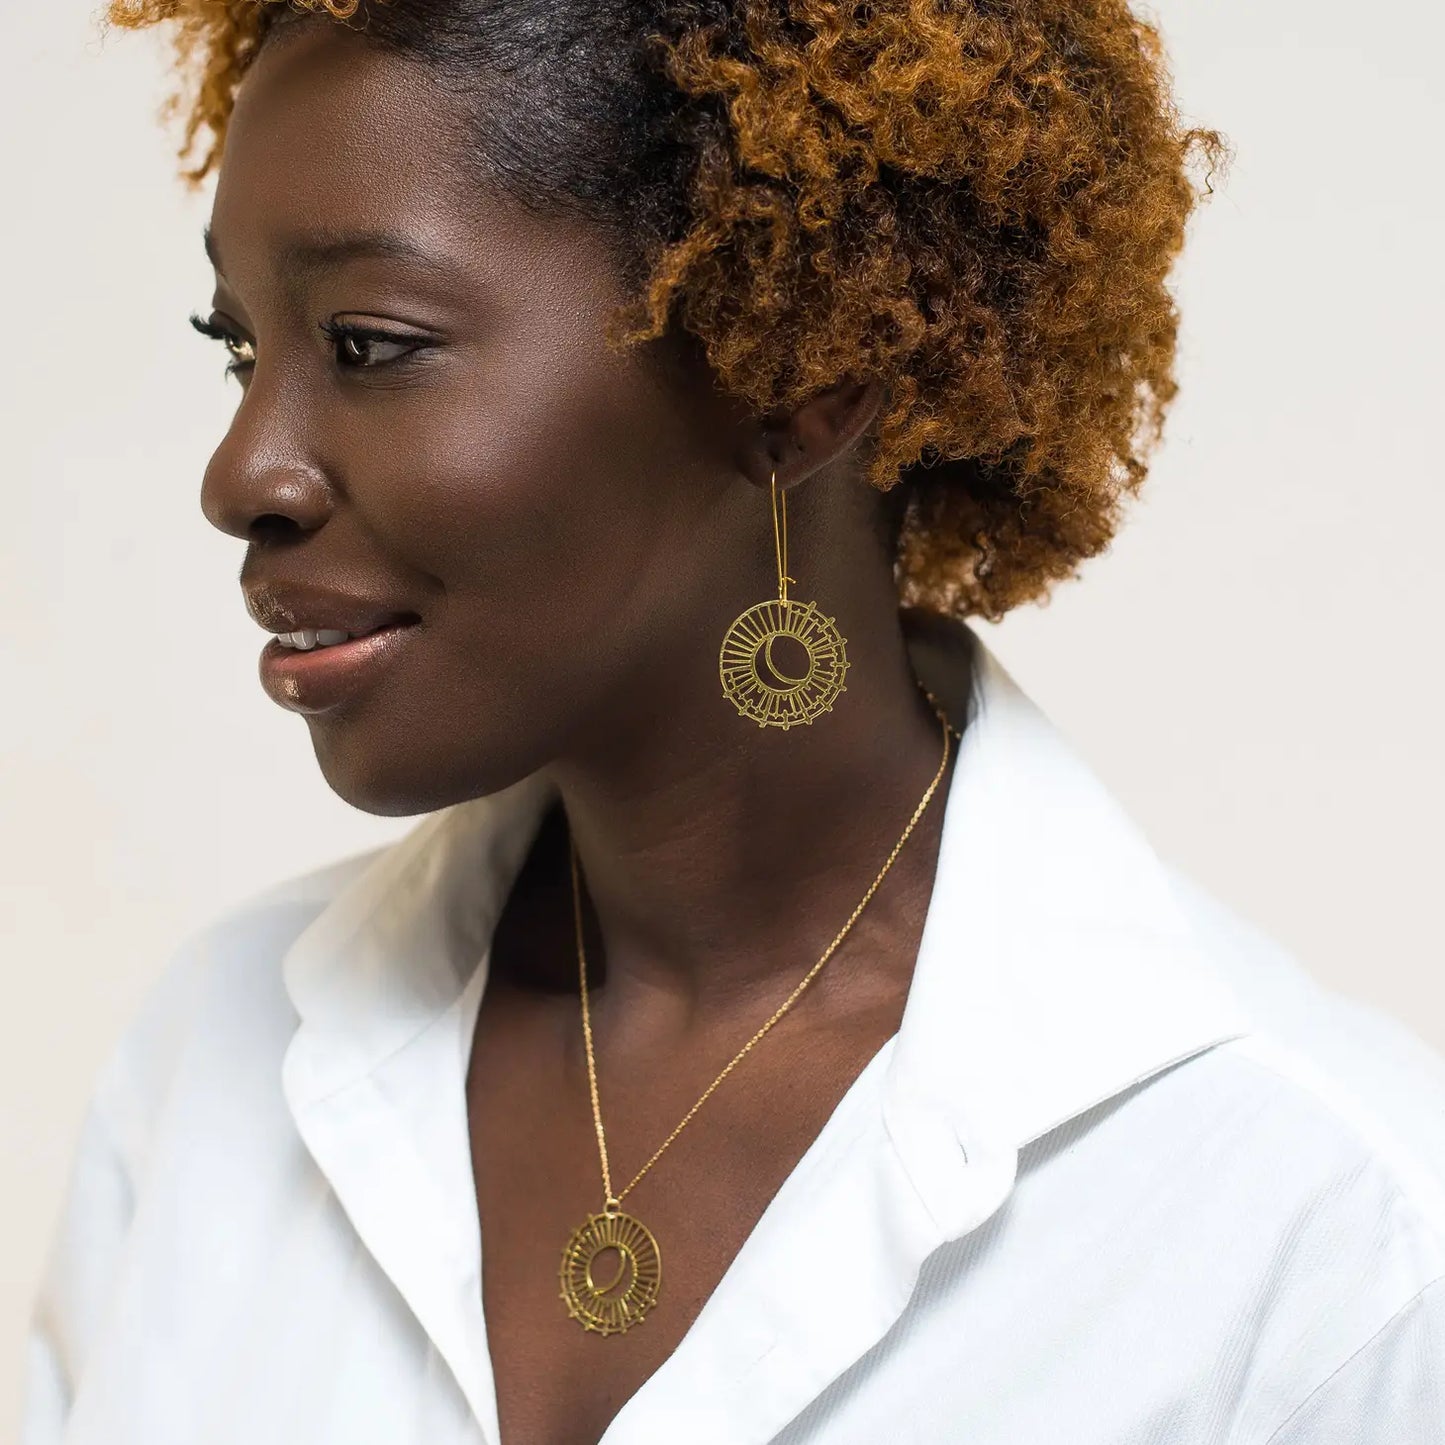 woman wearing gold earrings and matching necklace